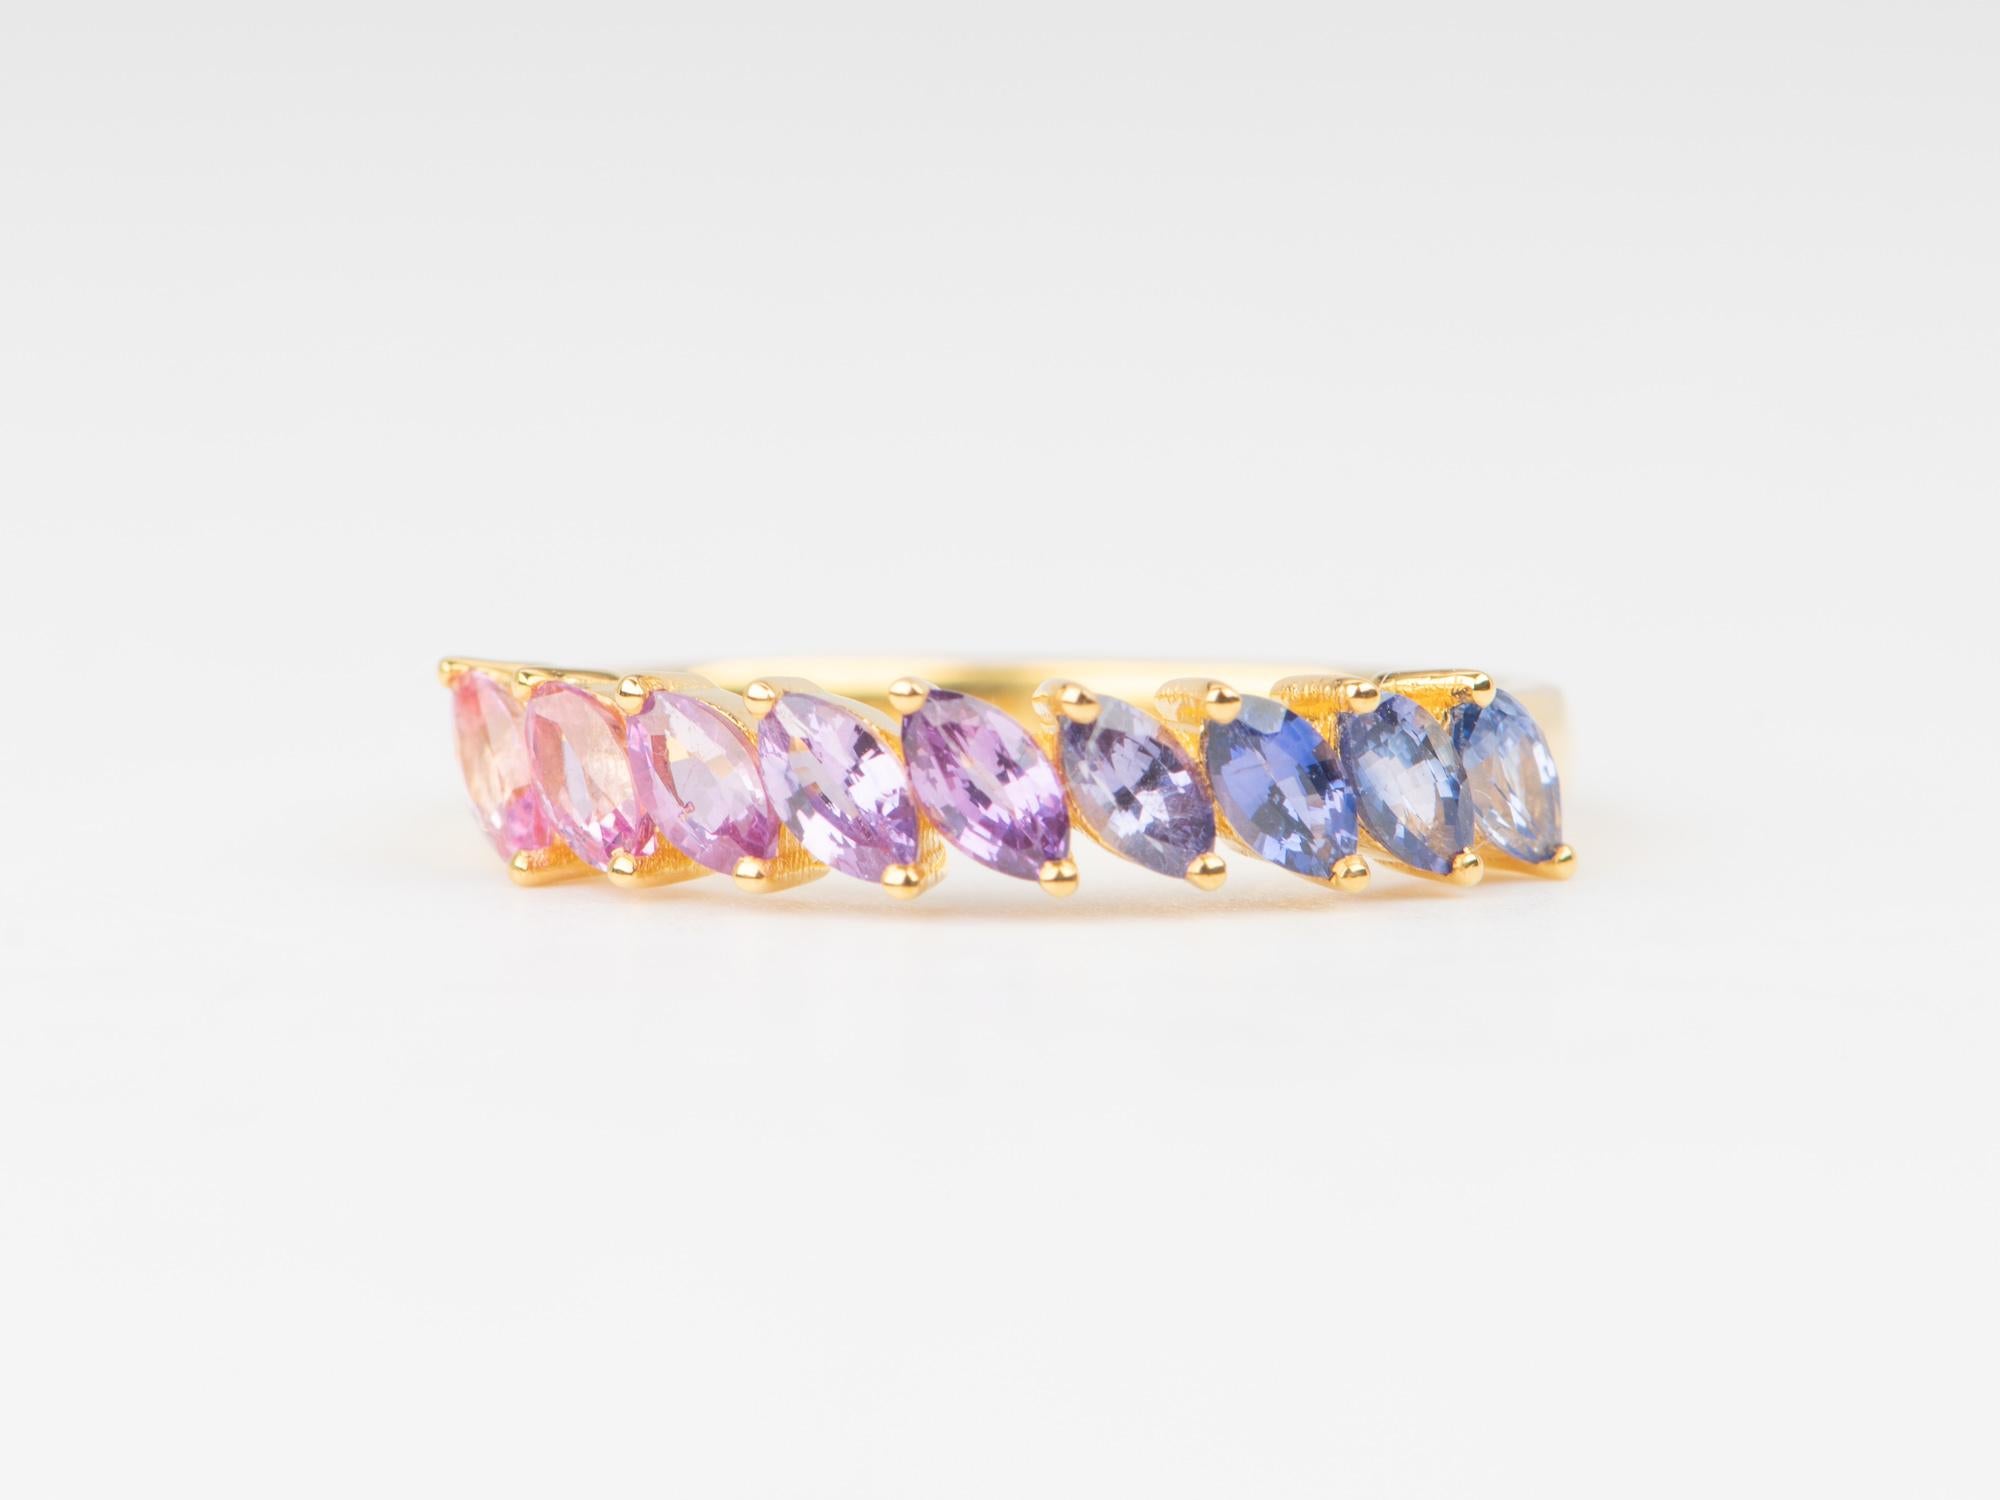 ♥ This is a stunning ring set with marquise sapphires ranging from pink, lavender, to purple, purplish blue colors
♥ These colors in sapphire are very difficult to find and match into an ombre shade. We only had enough stones to make one ring, not